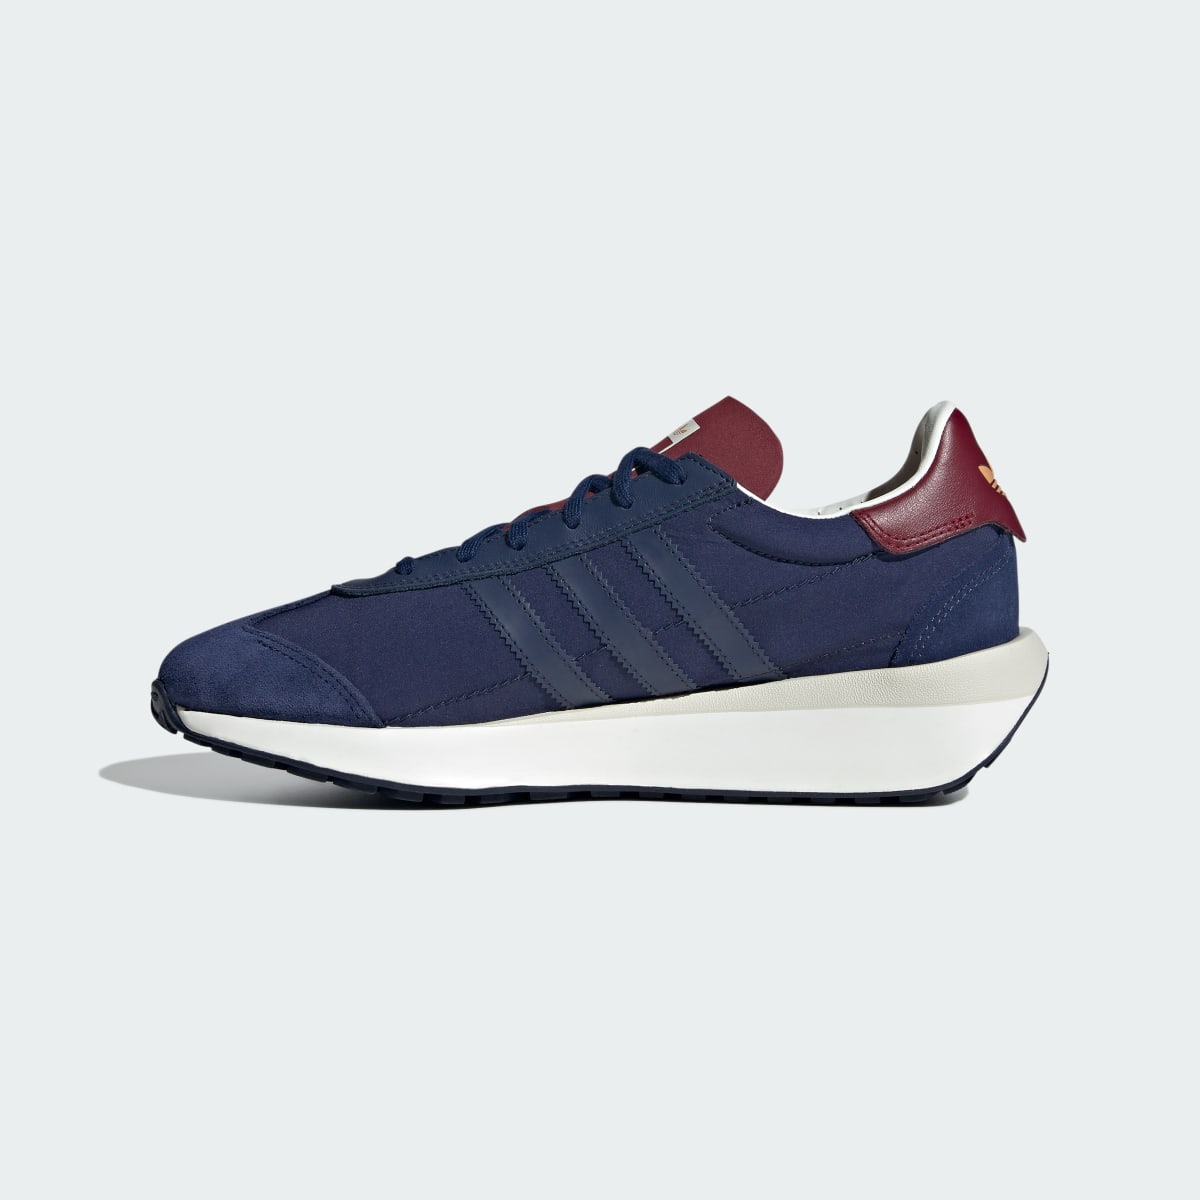 Adidas Chaussure Country XLG. 10